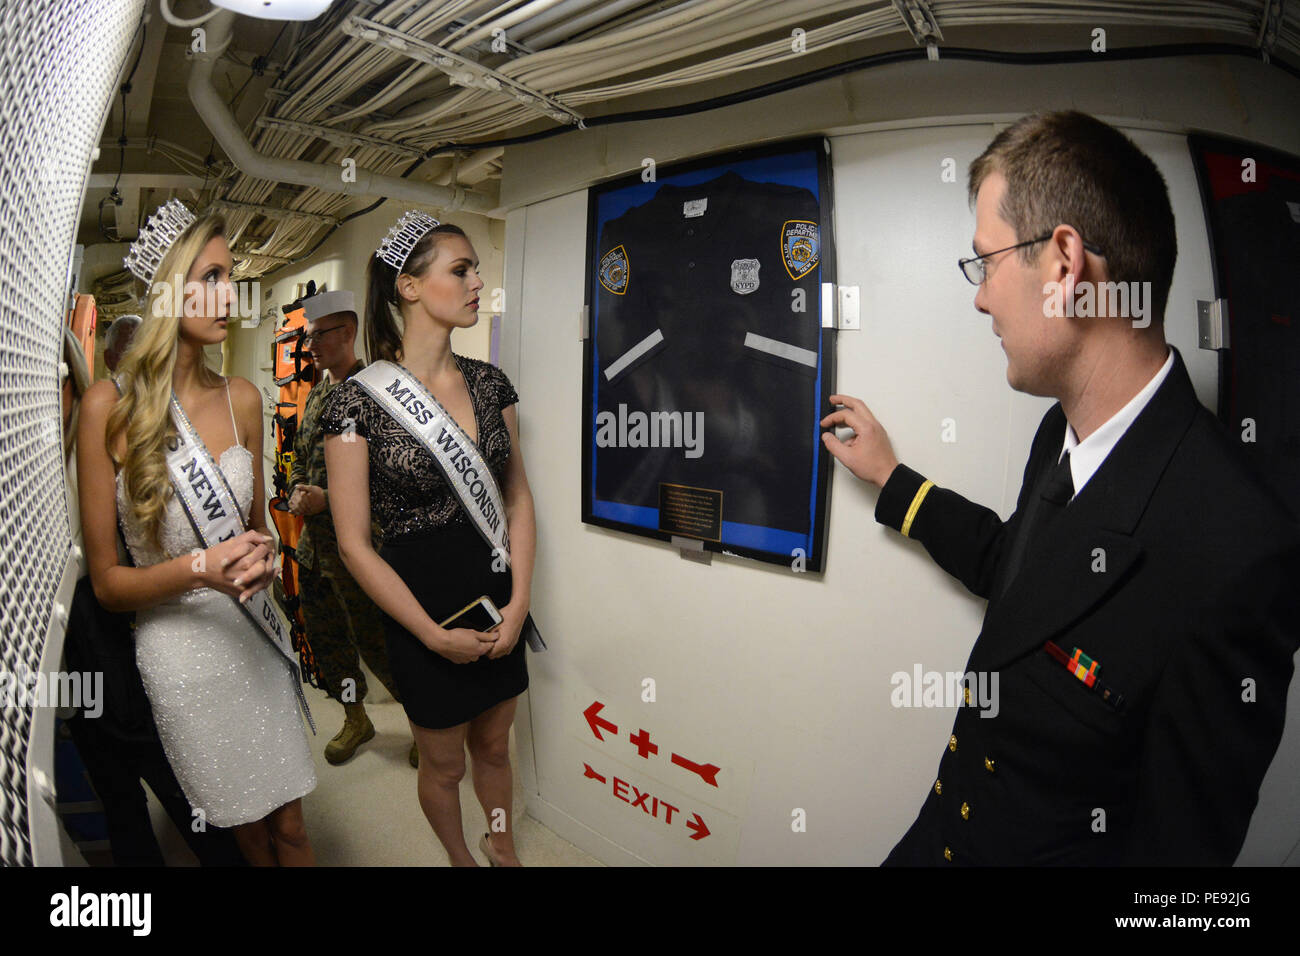 151109-N-WD757-145 NEW YORK (Nov. 9, 2015) Miss New Jersey USA Jessielyn Palumbo, left, and Miss Wisconsin USA Kate Redeker, middle, look at a uniform used by a New York Police Department officer during 9/11 displayed aboard the amphibious transport dock ship USS New York (LPD 21) during a tour at a formal reception for Veterans Week New York City. Sailors from local Navy units are participating in Veterans Week New York City 2015 to honor the service of all our nation’s veterans.  (U.S. Navy photo by Mass Communication Specialist 1st Class Carlos M. Vazquez II/Released) Stock Photo